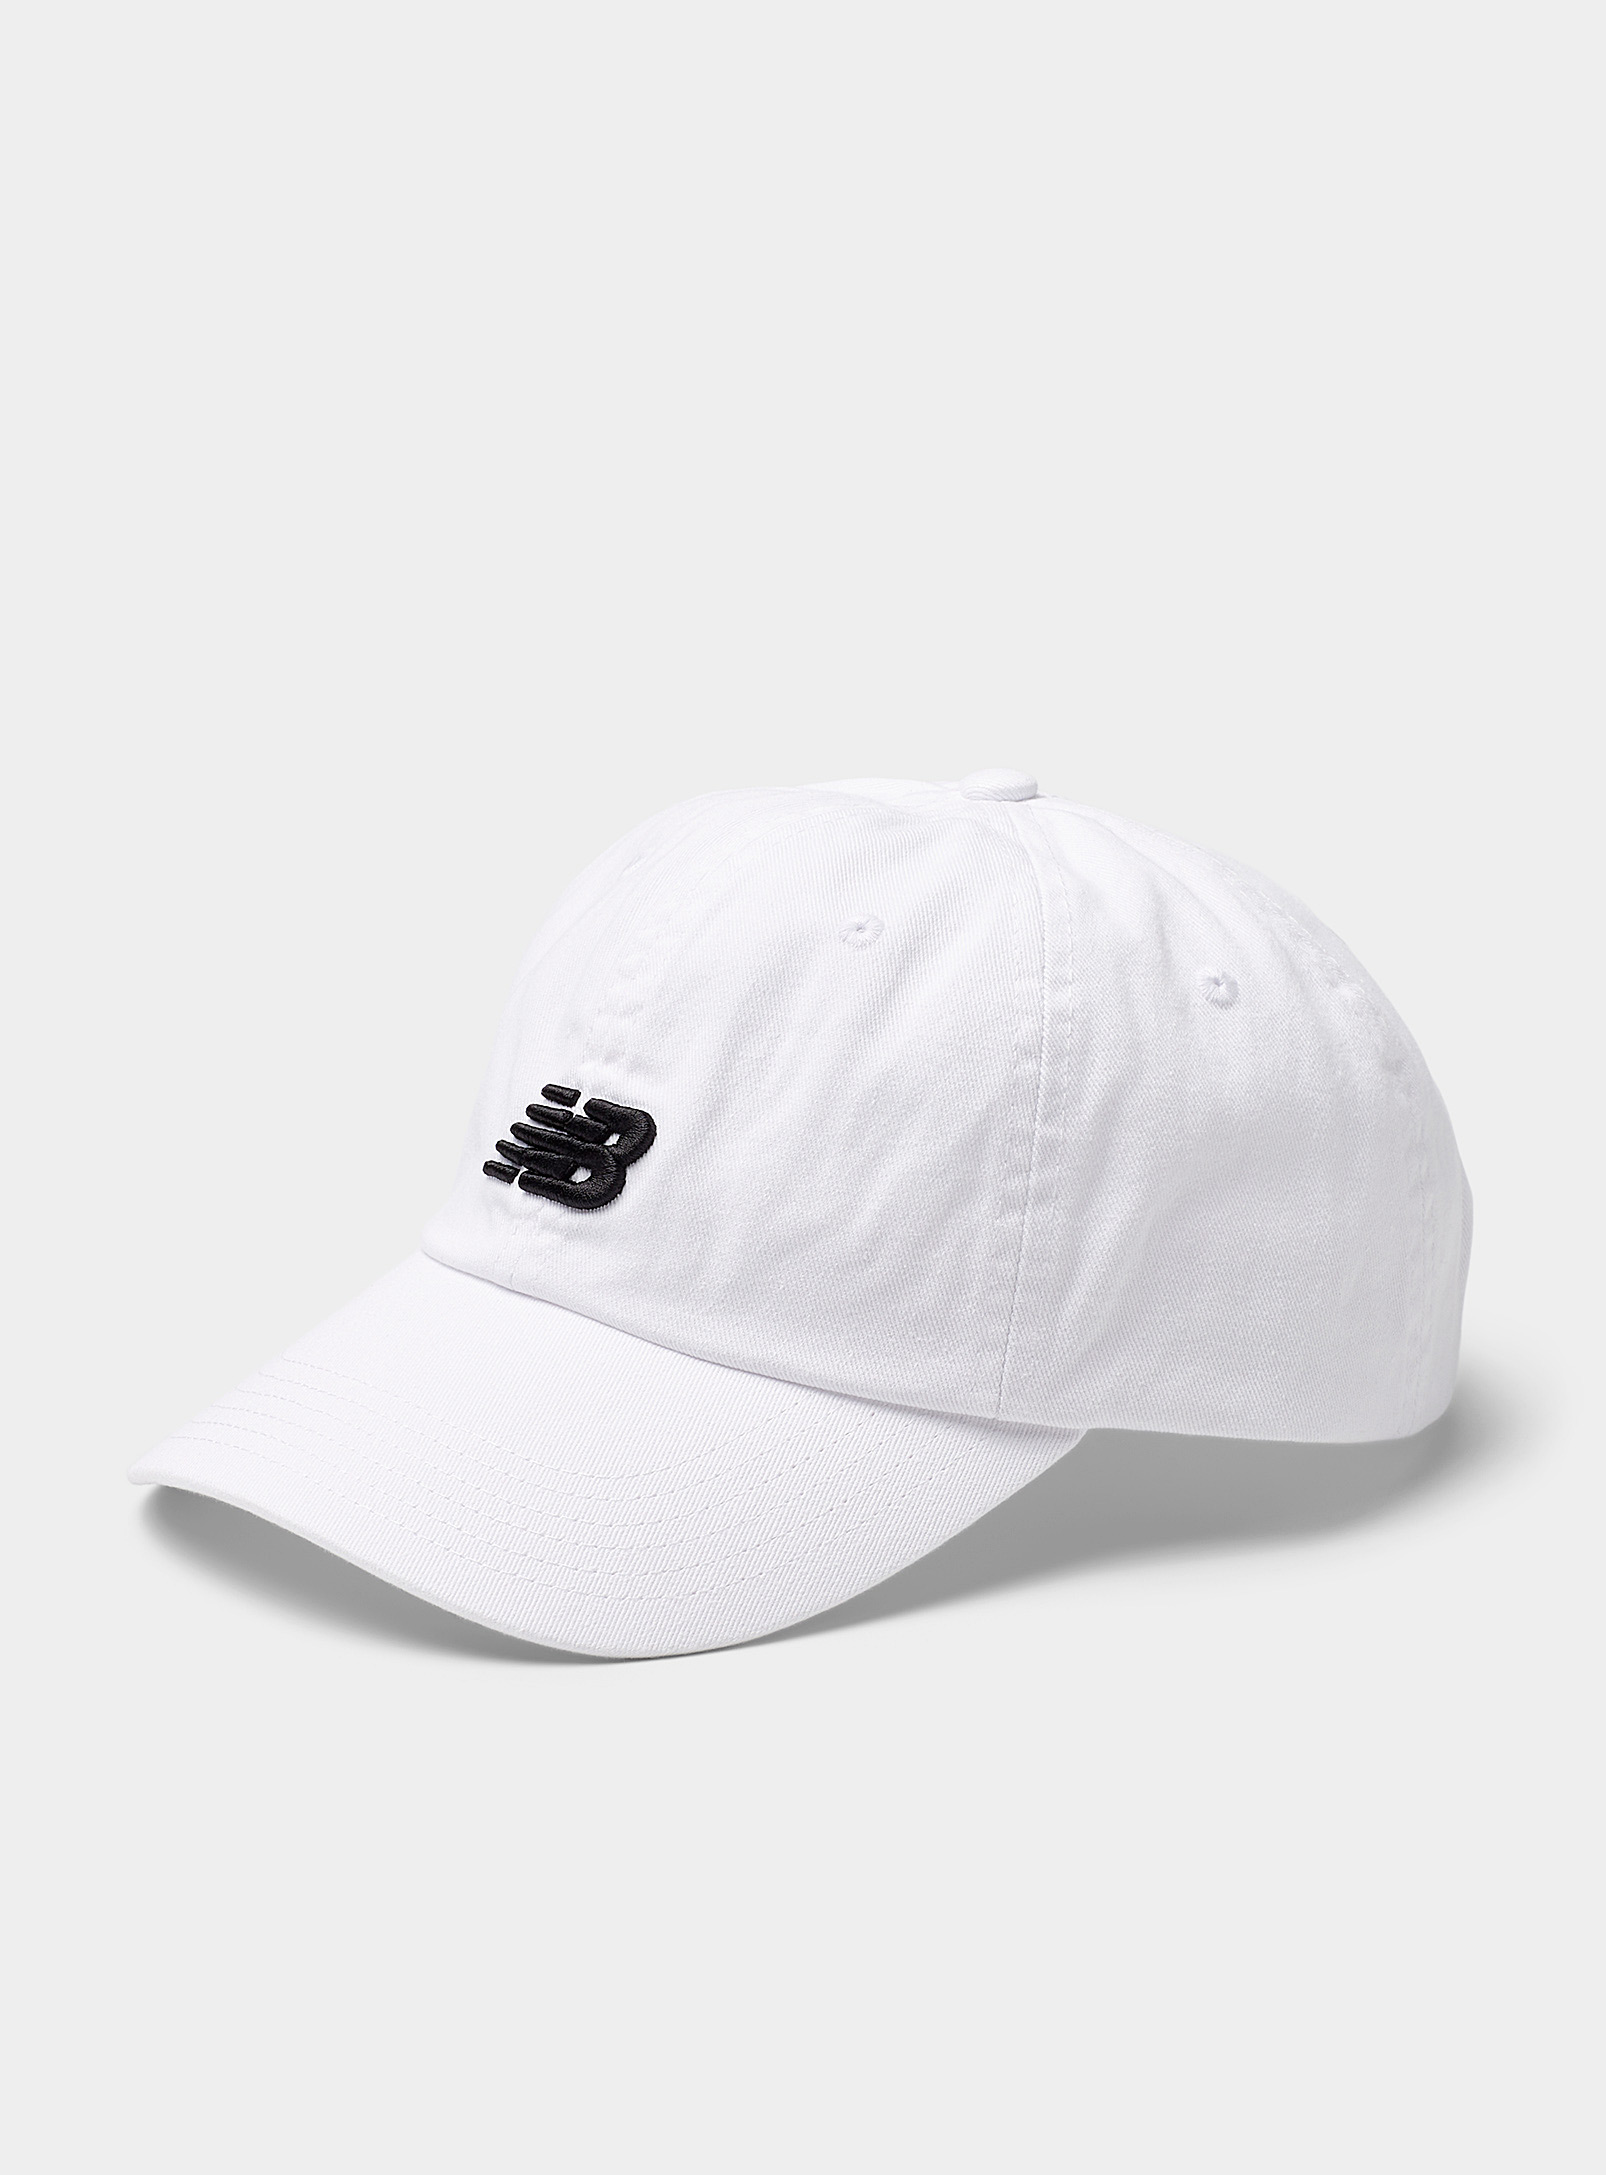 New Balance Embroidered-logo Dad Cap In White